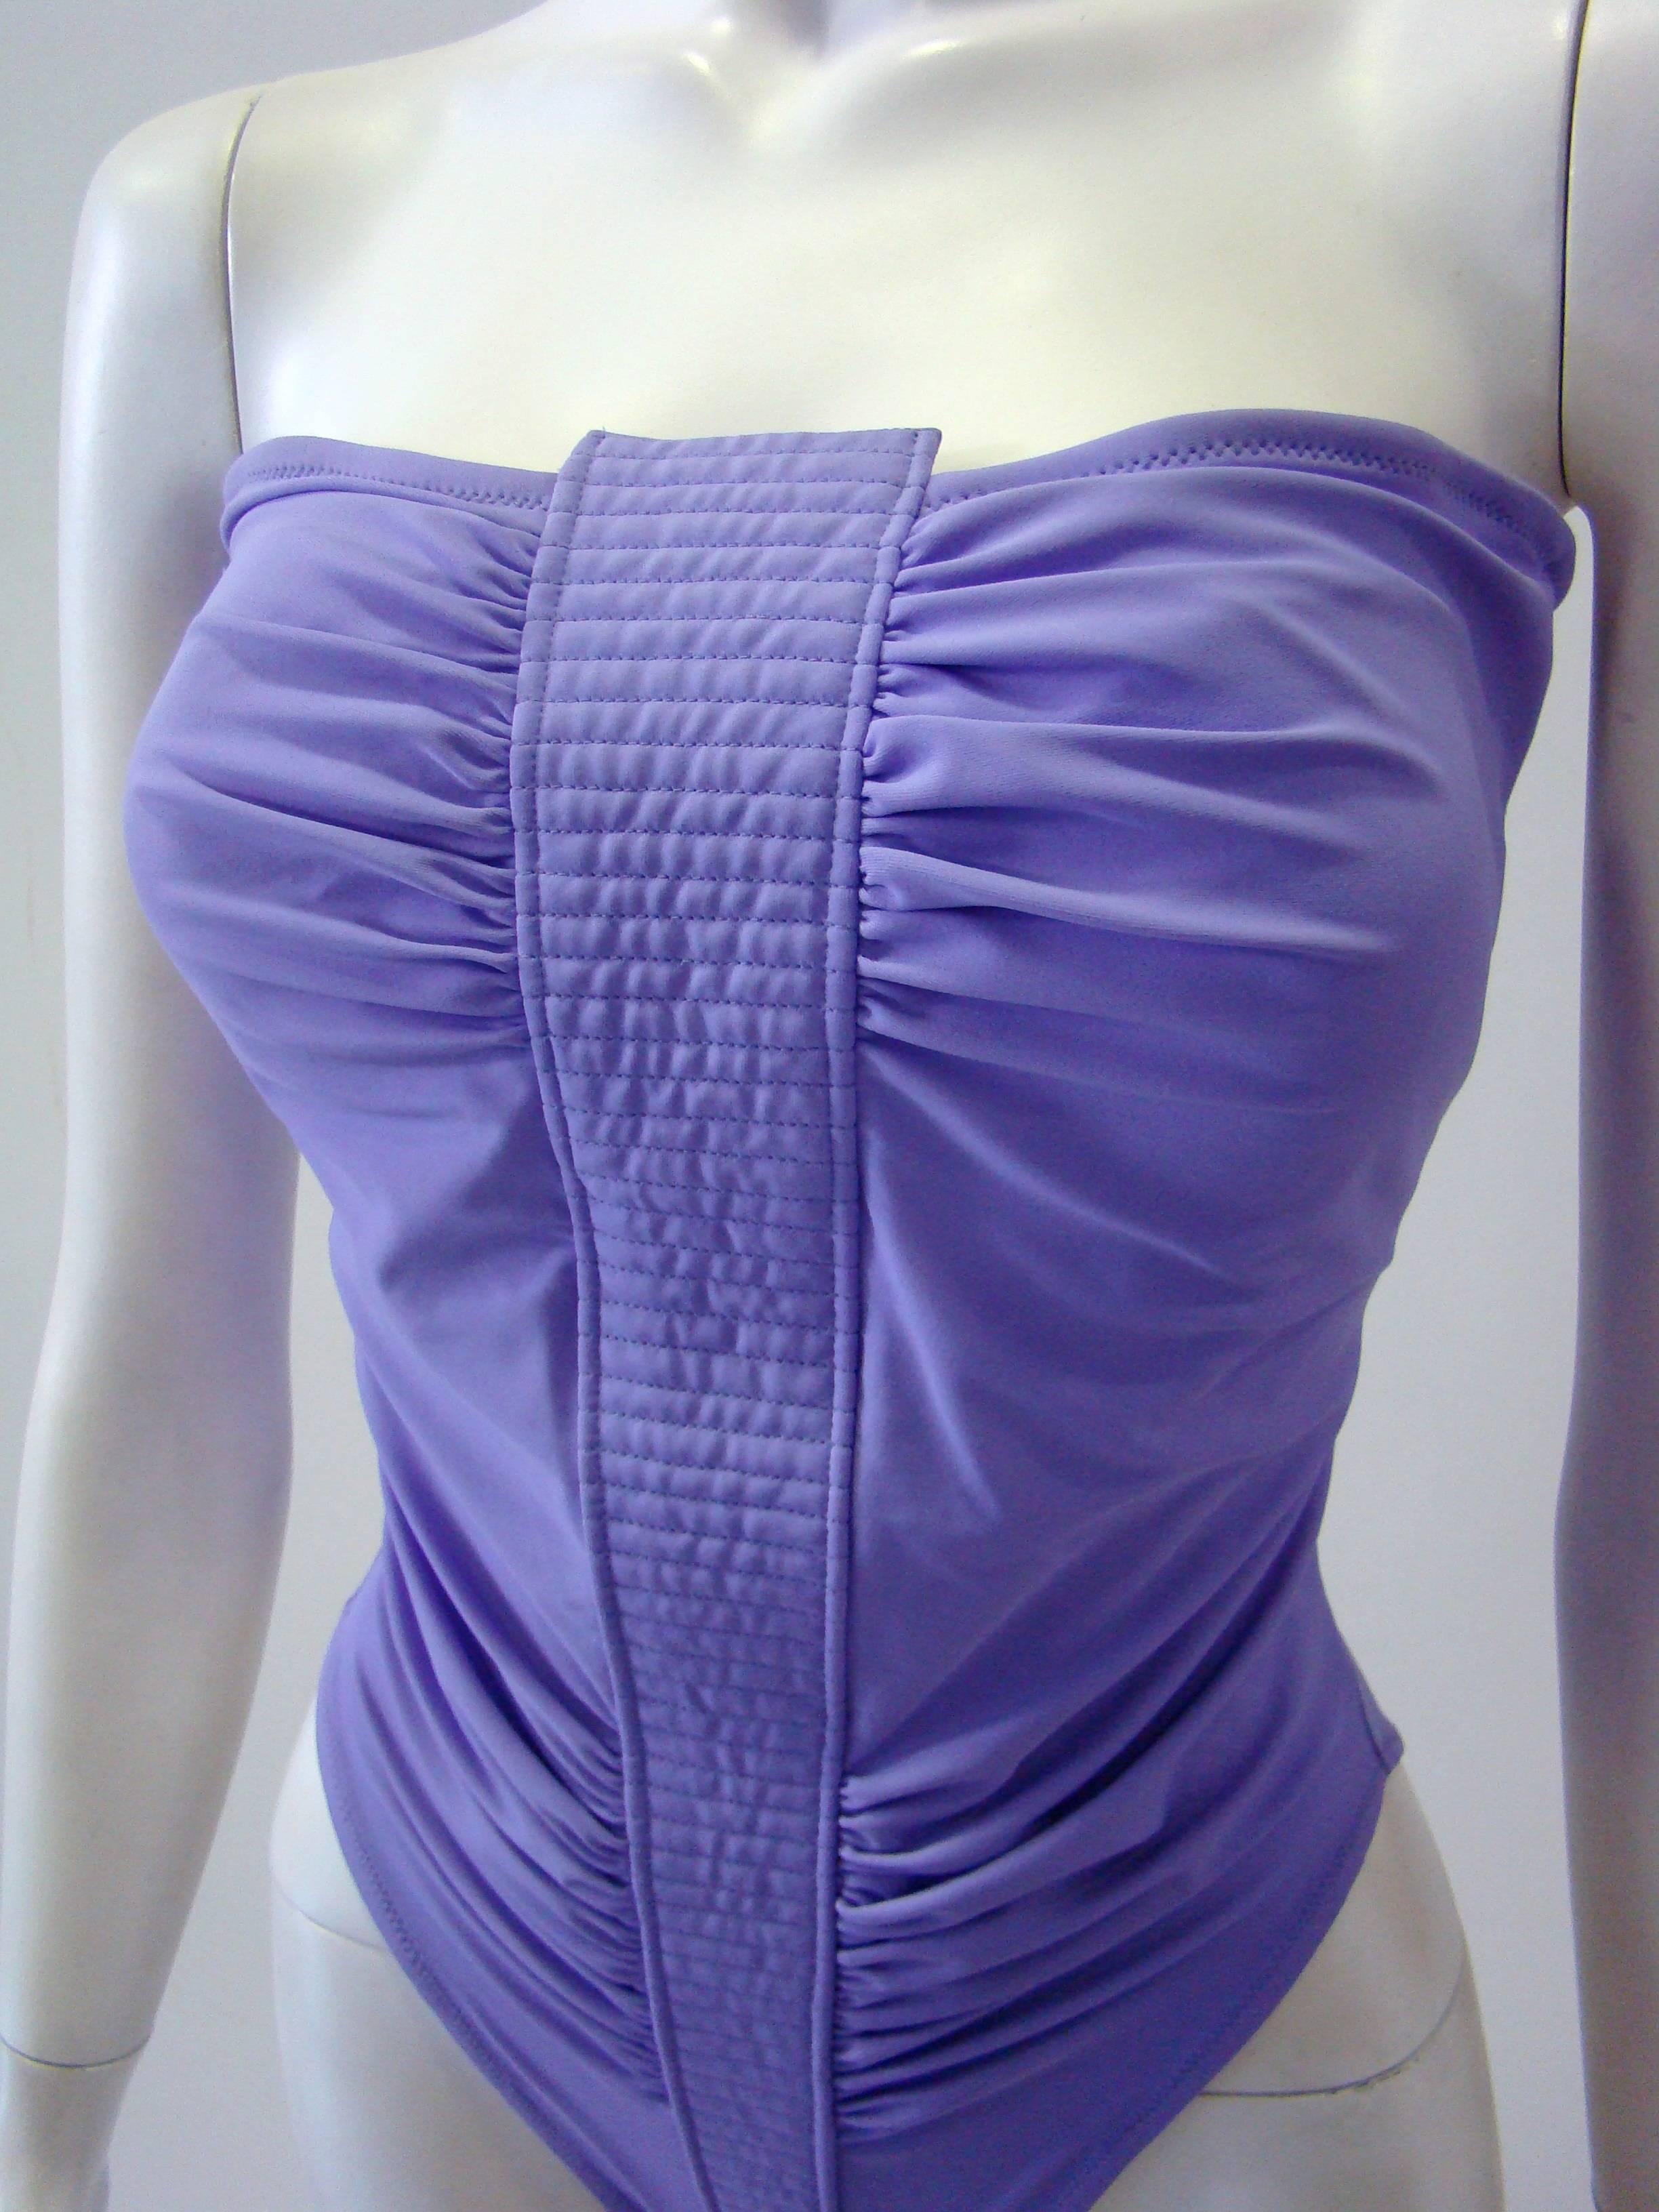 Gianni Versace Lilac Bathing Suit In Excellent Condition For Sale In Athens, Agia Paraskevi